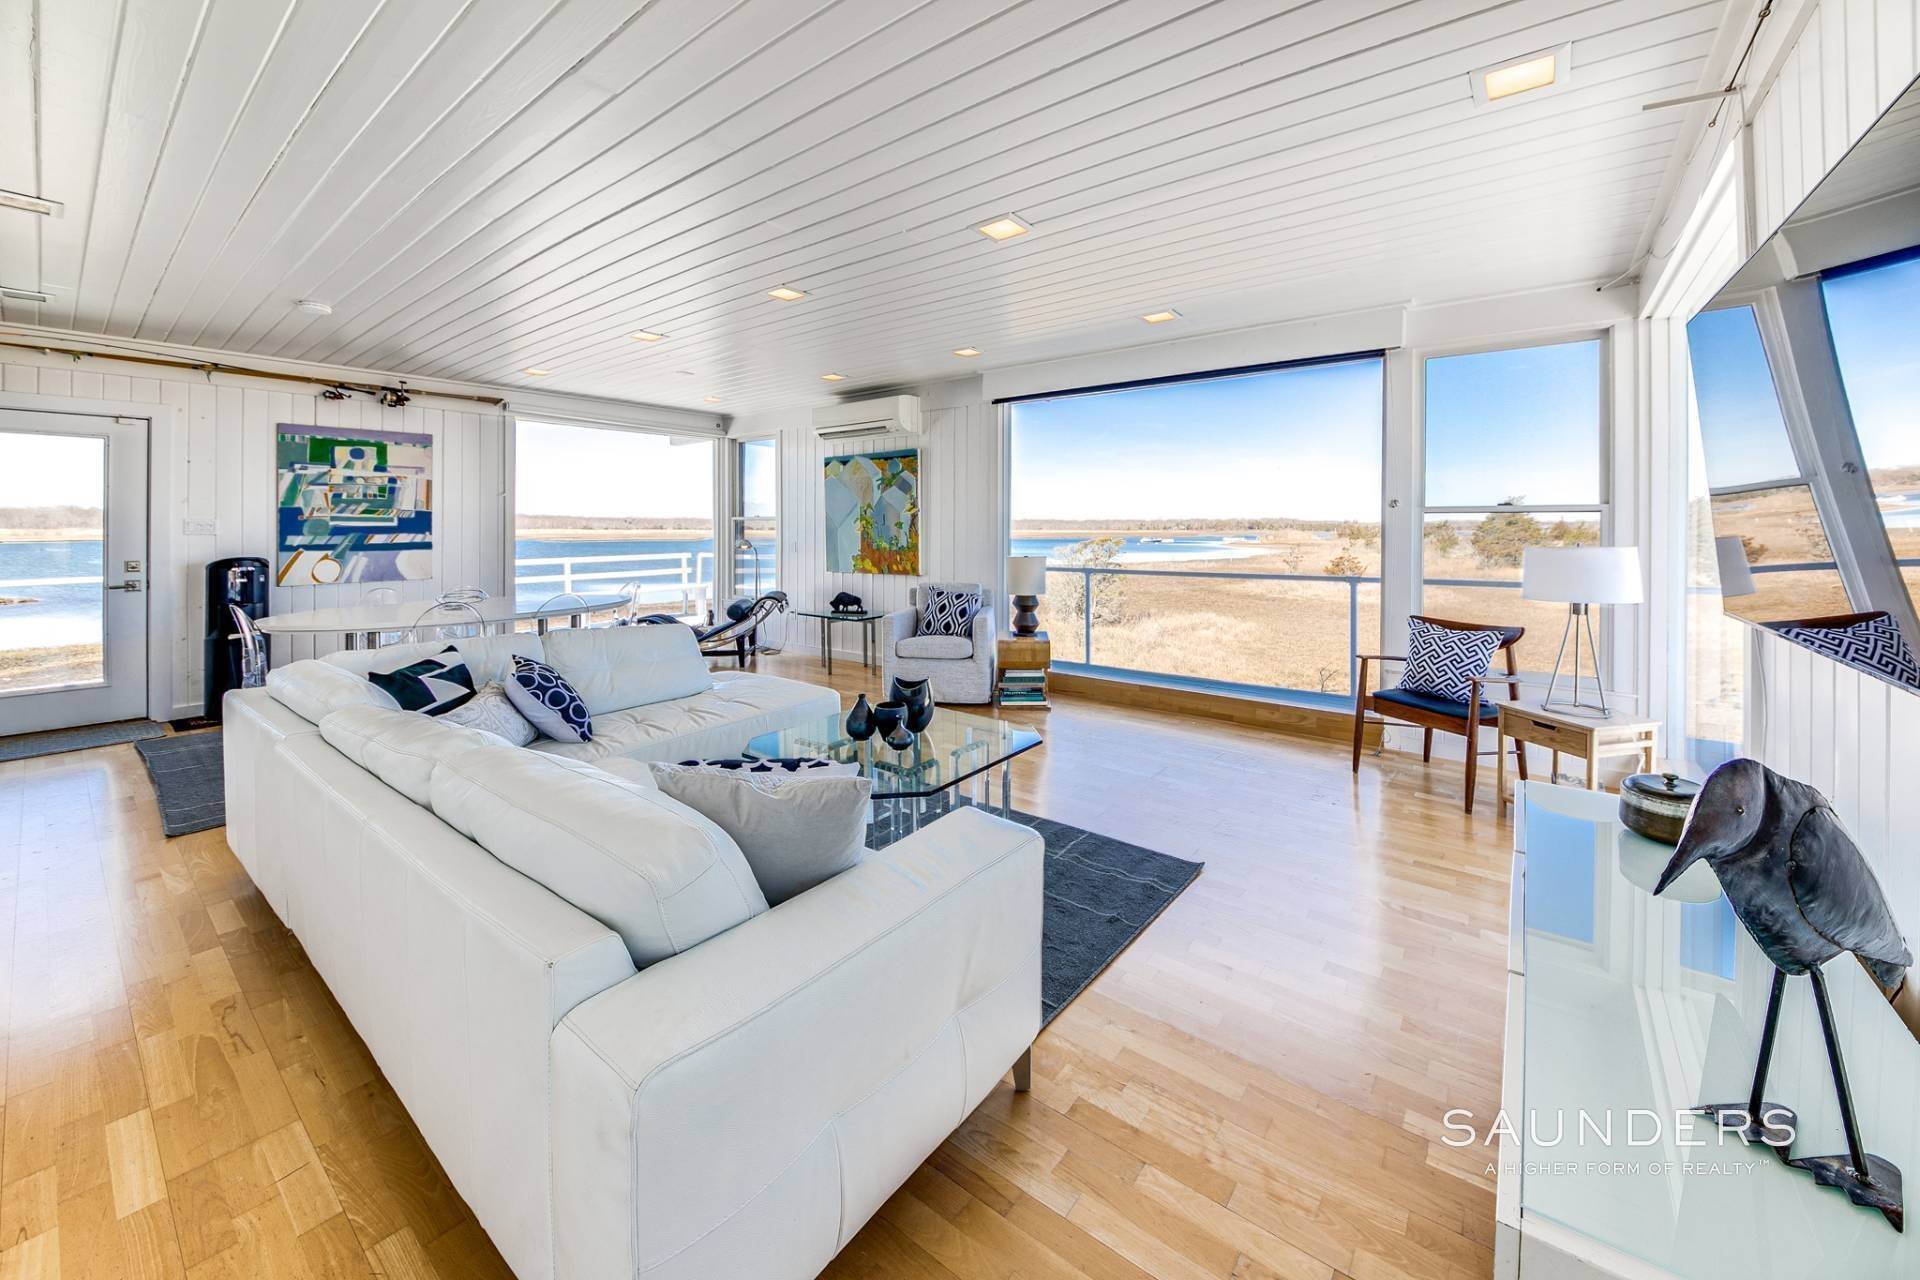 Single Family Homes for Sale at 3 Bedroom With 270 Degree Water Views! 113 Louse Point, East Hampton, NY 11937